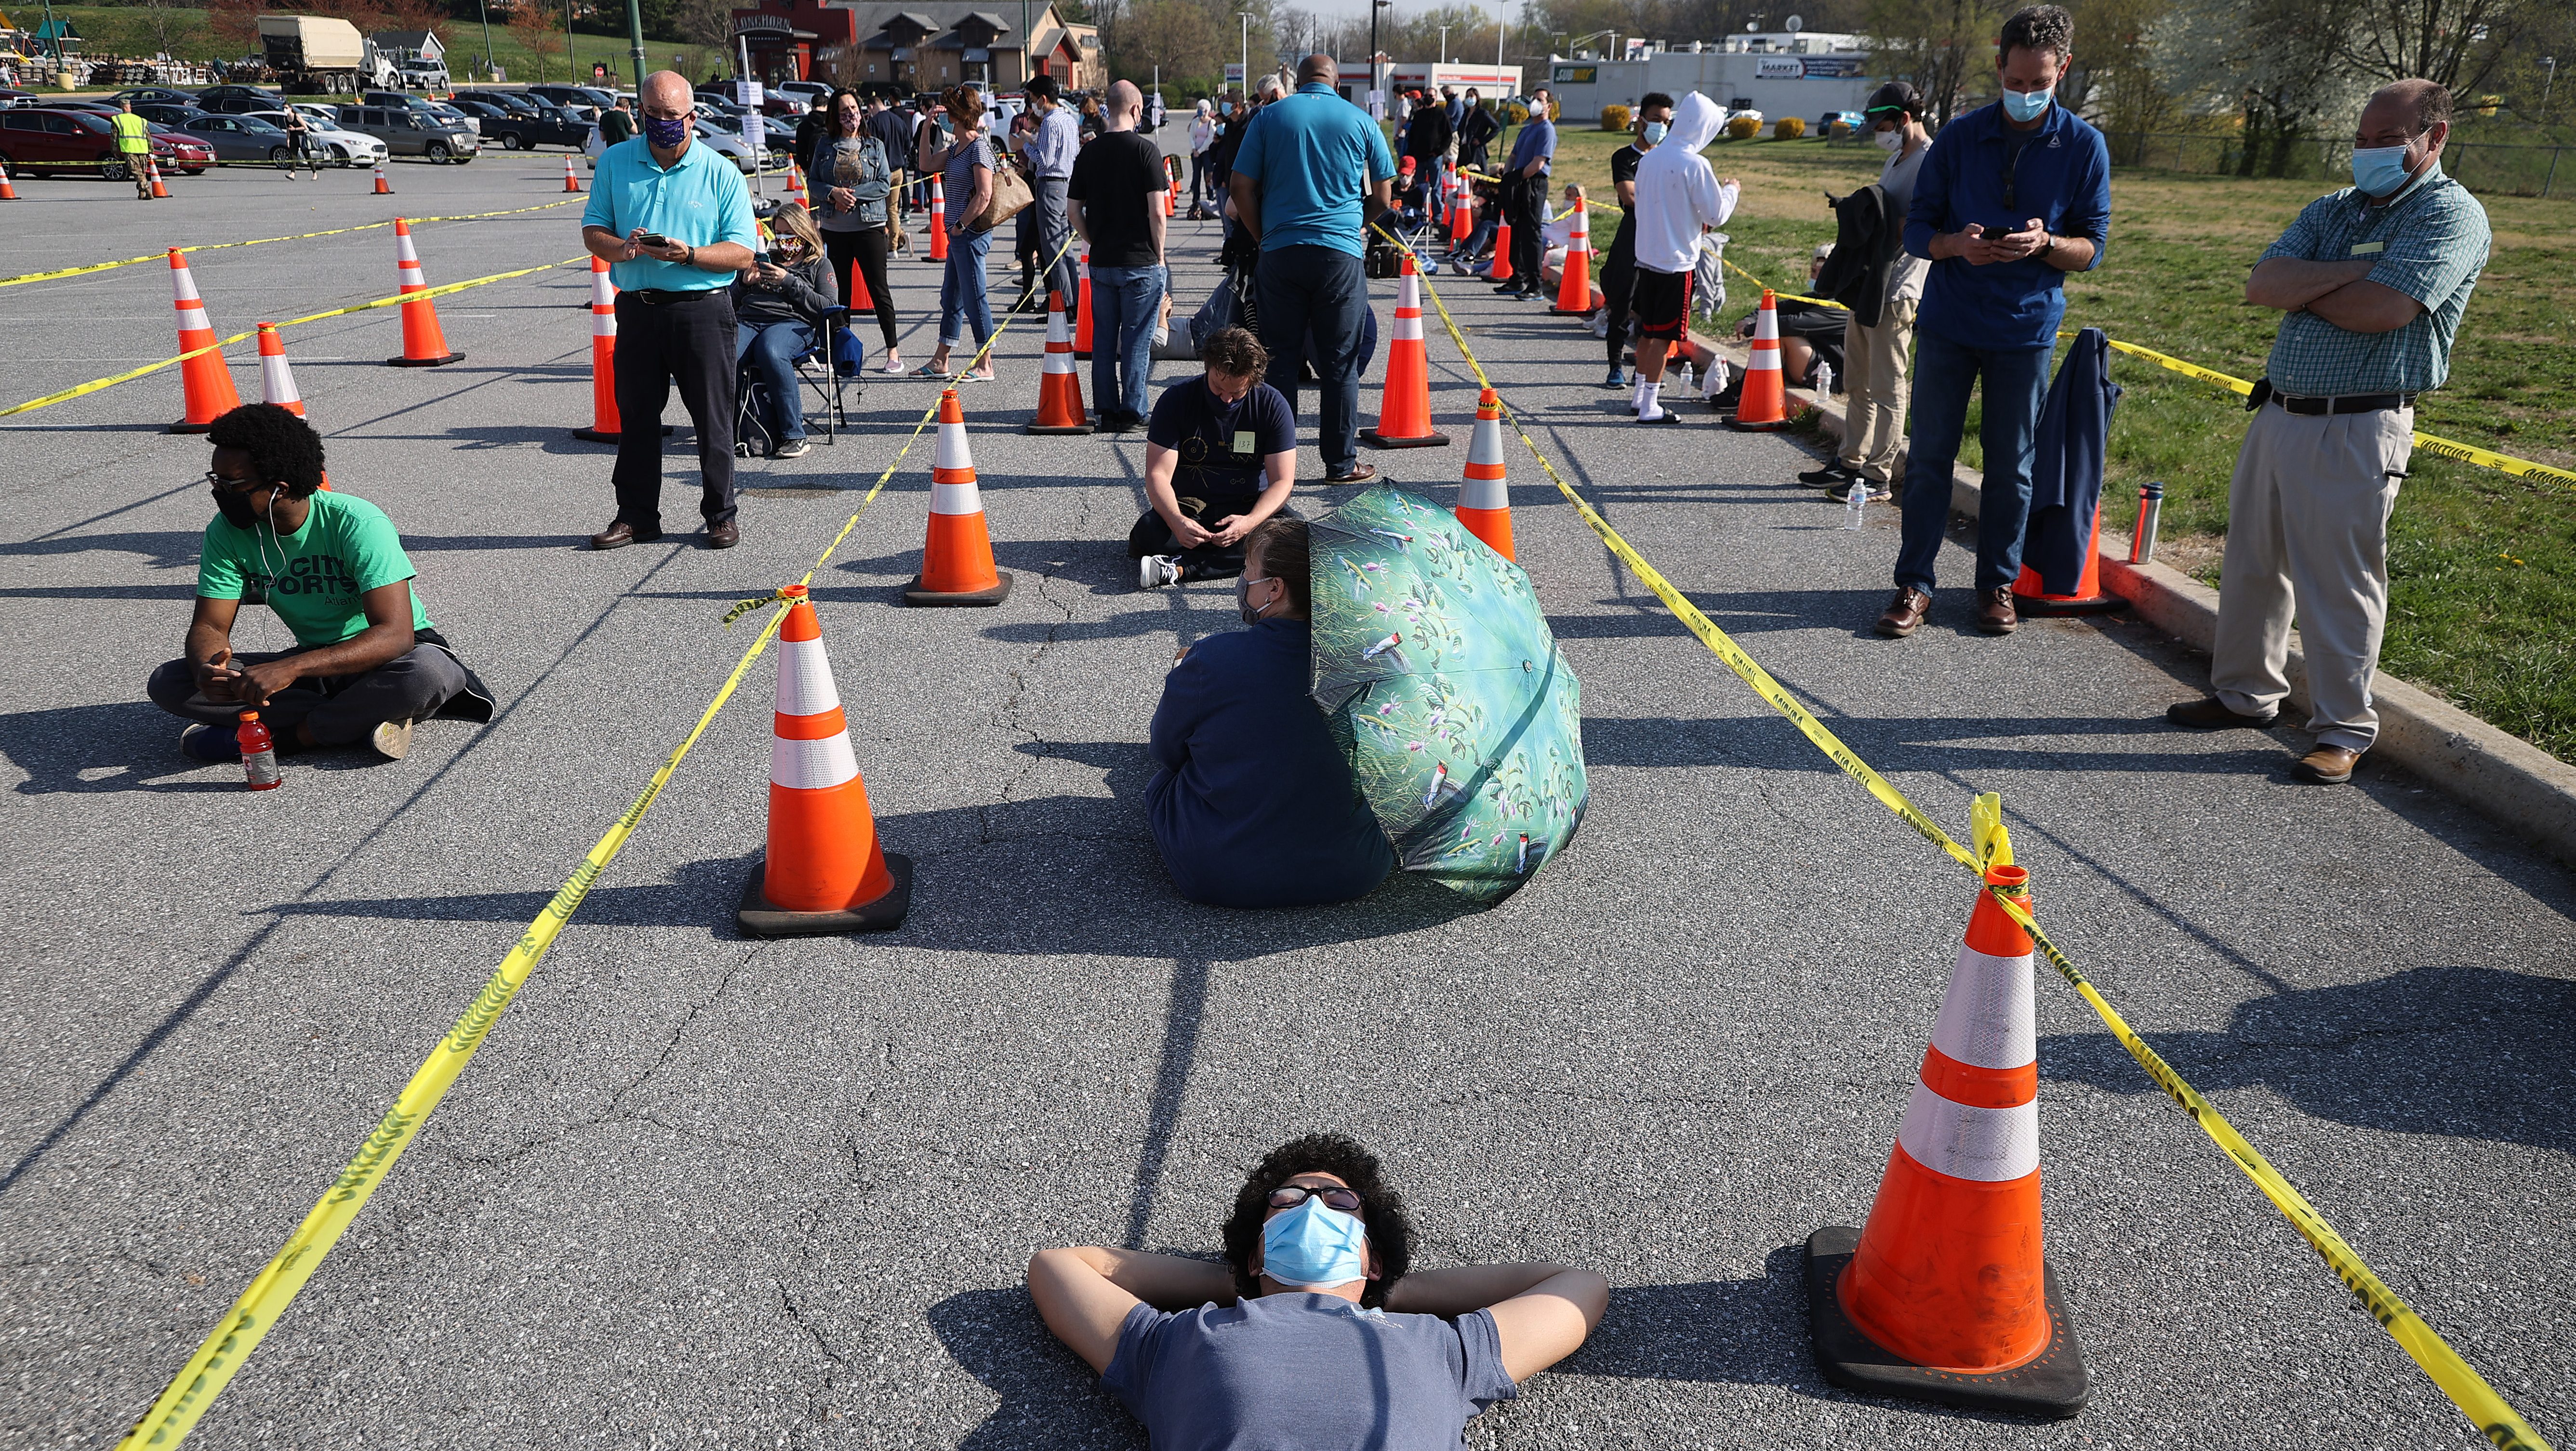 Eugene Chirkov of Bethesda, Maryland, finds a sliver of shade from a traffic cone while waiting in line with people without appointments outside the mass coronavirus vaccination site at Hagerstown Premium Outlets on April 7, 2021, in Hagerstown, Maryland. He is 140th in line.